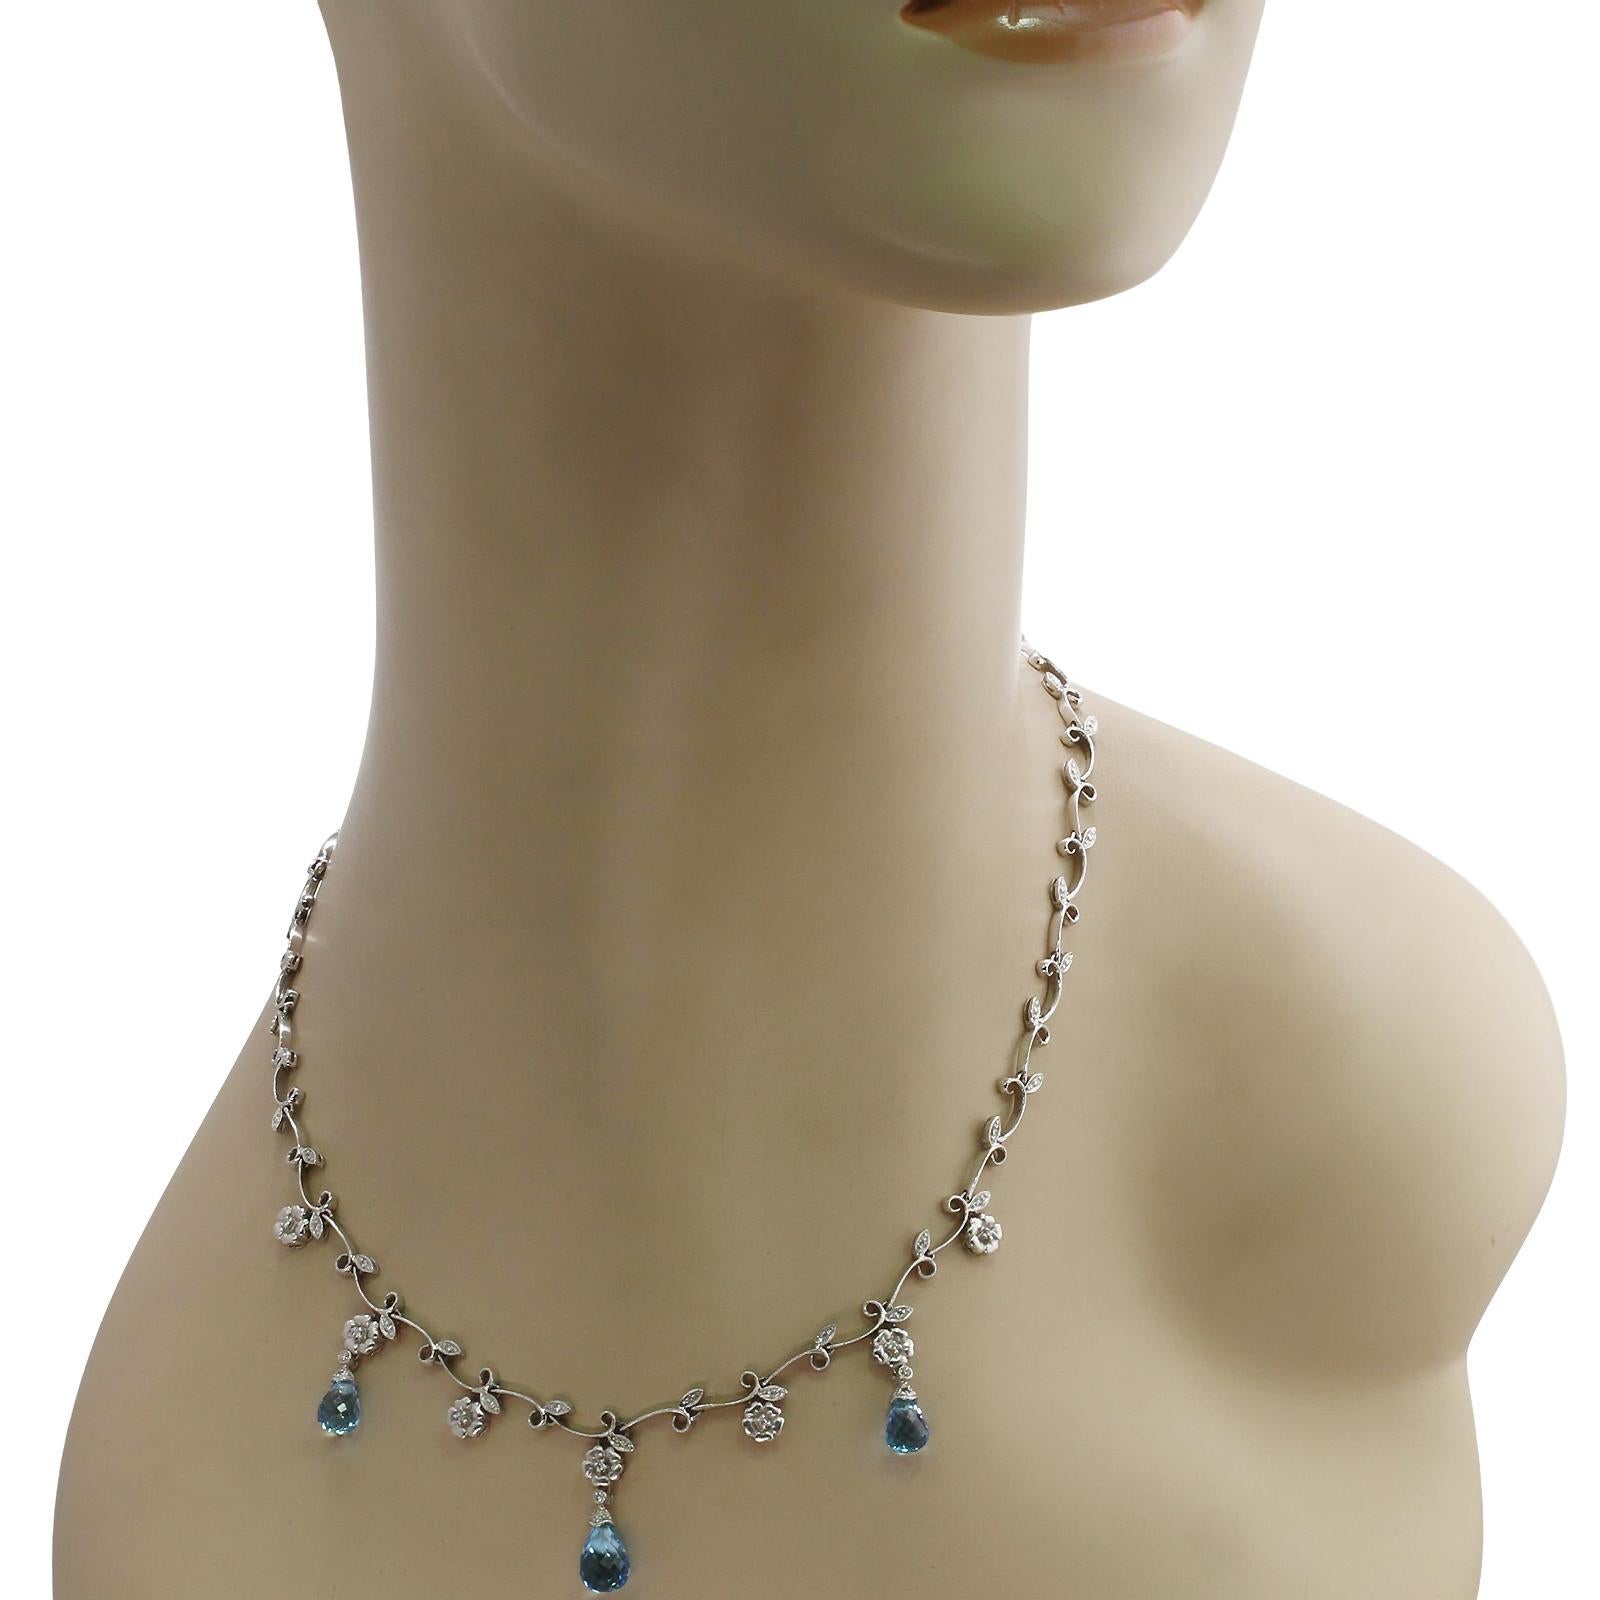 This gorgeous garland necklace features a design of leaves and flowers crafted in 14k white gold and accented with blue topaz briolletes and 30 round diamonds weighing an estimated 0.25 - 0.30 carats. Made in United States circa 1990s. Measurements: